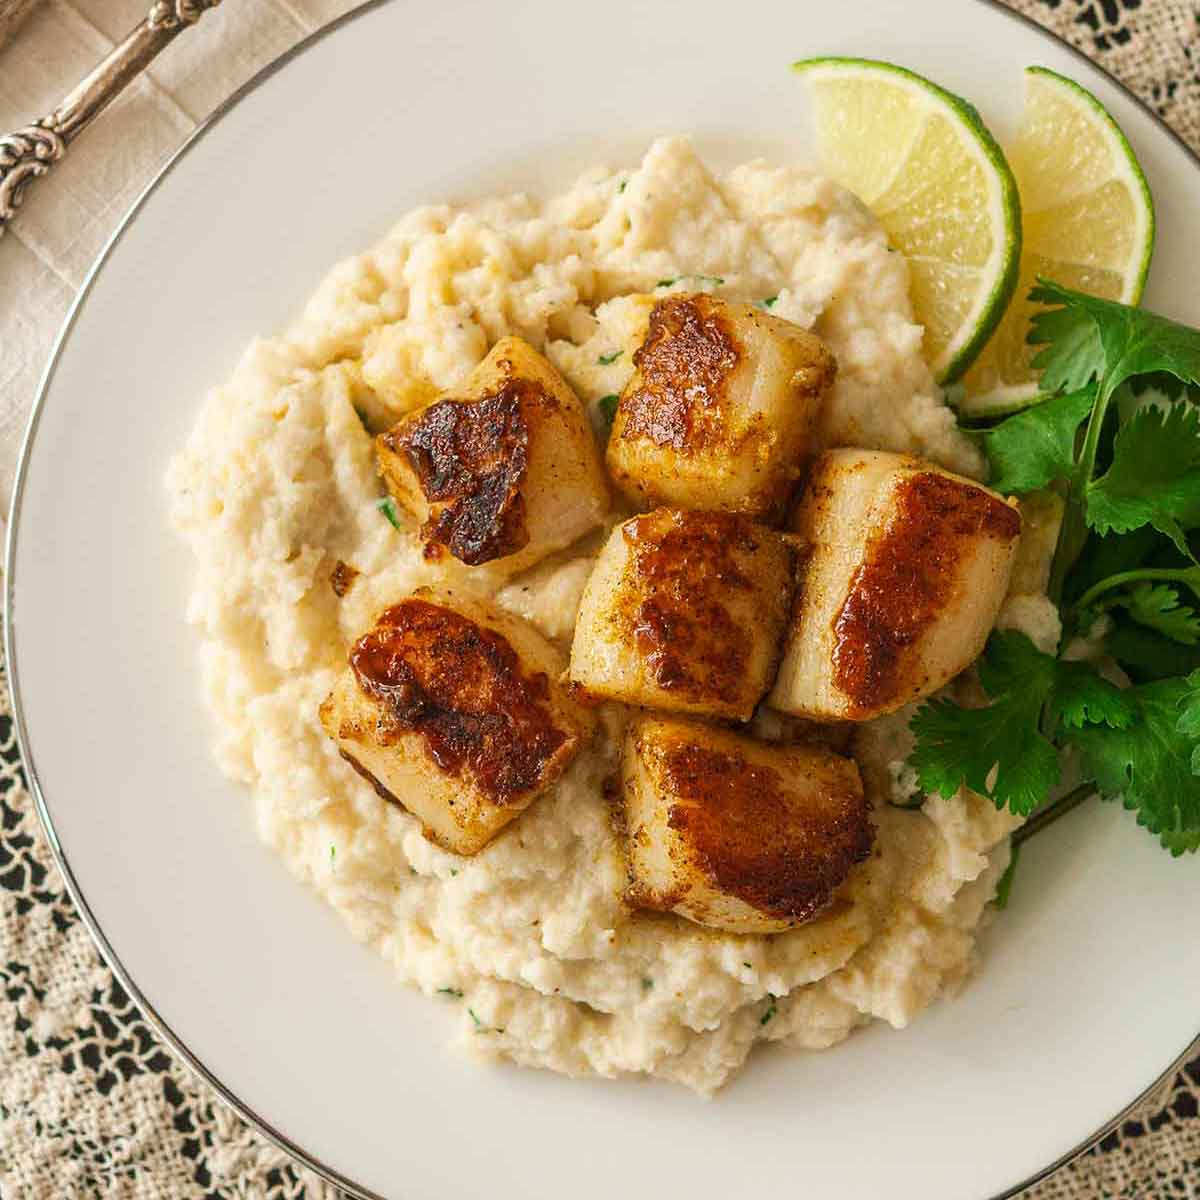 6 curry-seared scallops on a plate with mashed cauliflower, parsley and 2 lime slices.